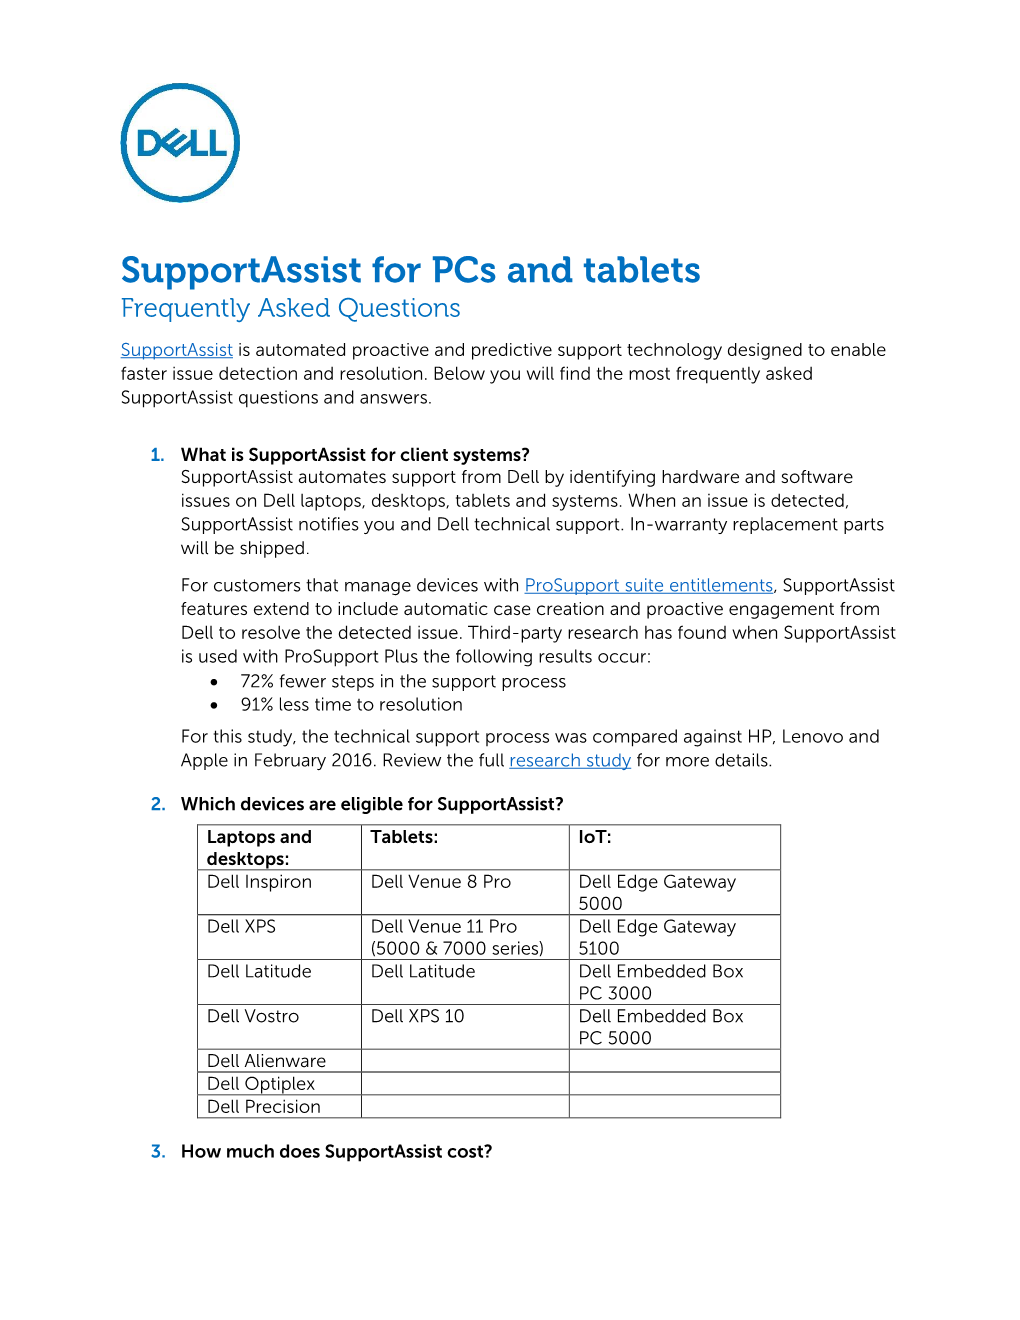 Dell Supportassist Components (Such As the Database Administration Group and the Operational Support Team) Are Assigned Separate Duties and Access Rights